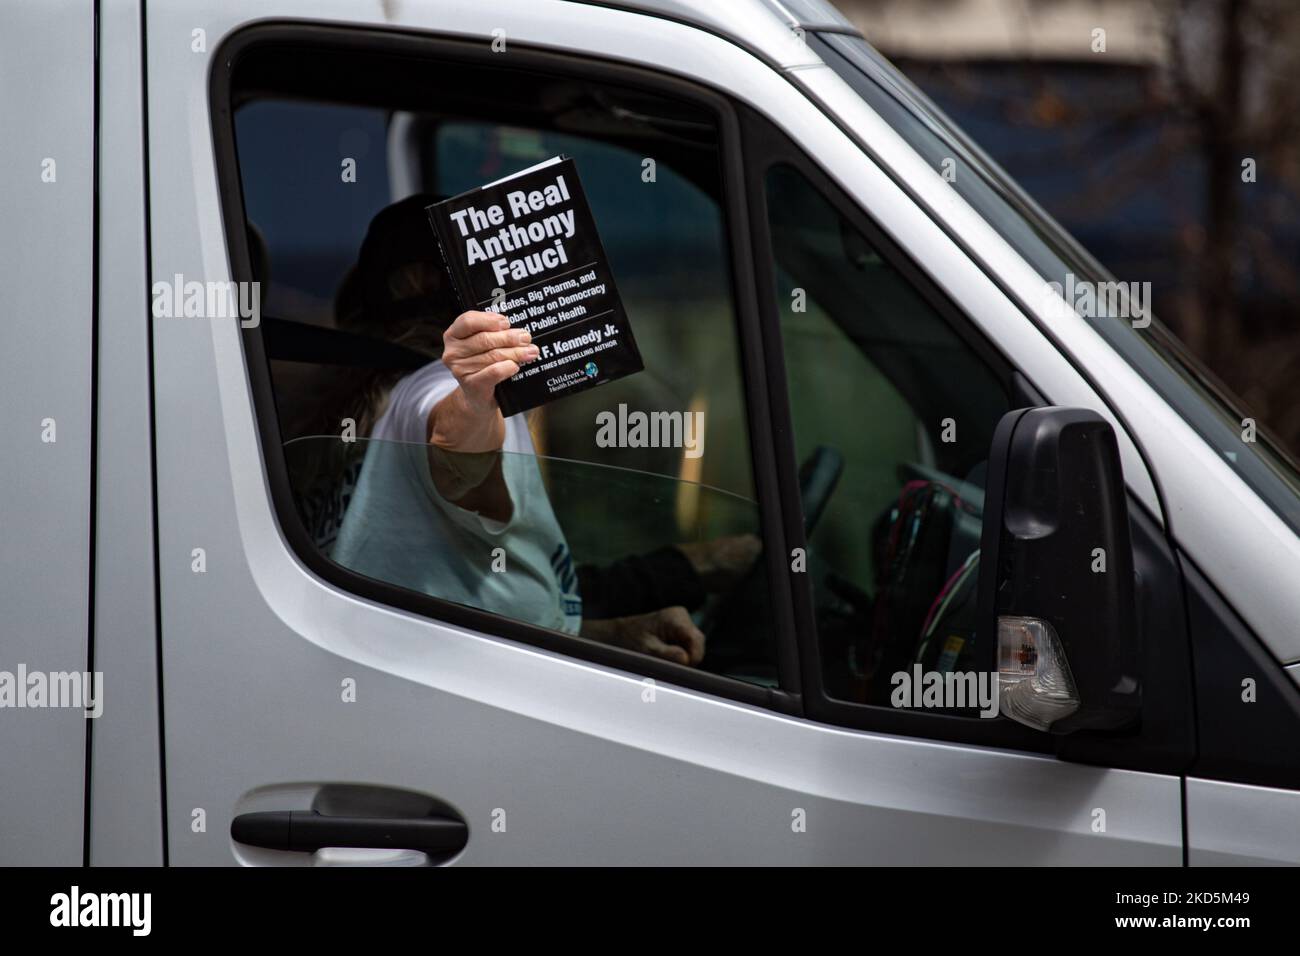 A woman holds a copy of Robert F. Kennedy Jr.'s book 'The Real Anthony Fauci' as a small convoy of truck drivers and people protesting against COVID-19-related mandates drives through Washington, D.C. on March 20, 2022 (Photo by Bryan Olin Dozier/NurPhoto) Stock Photo